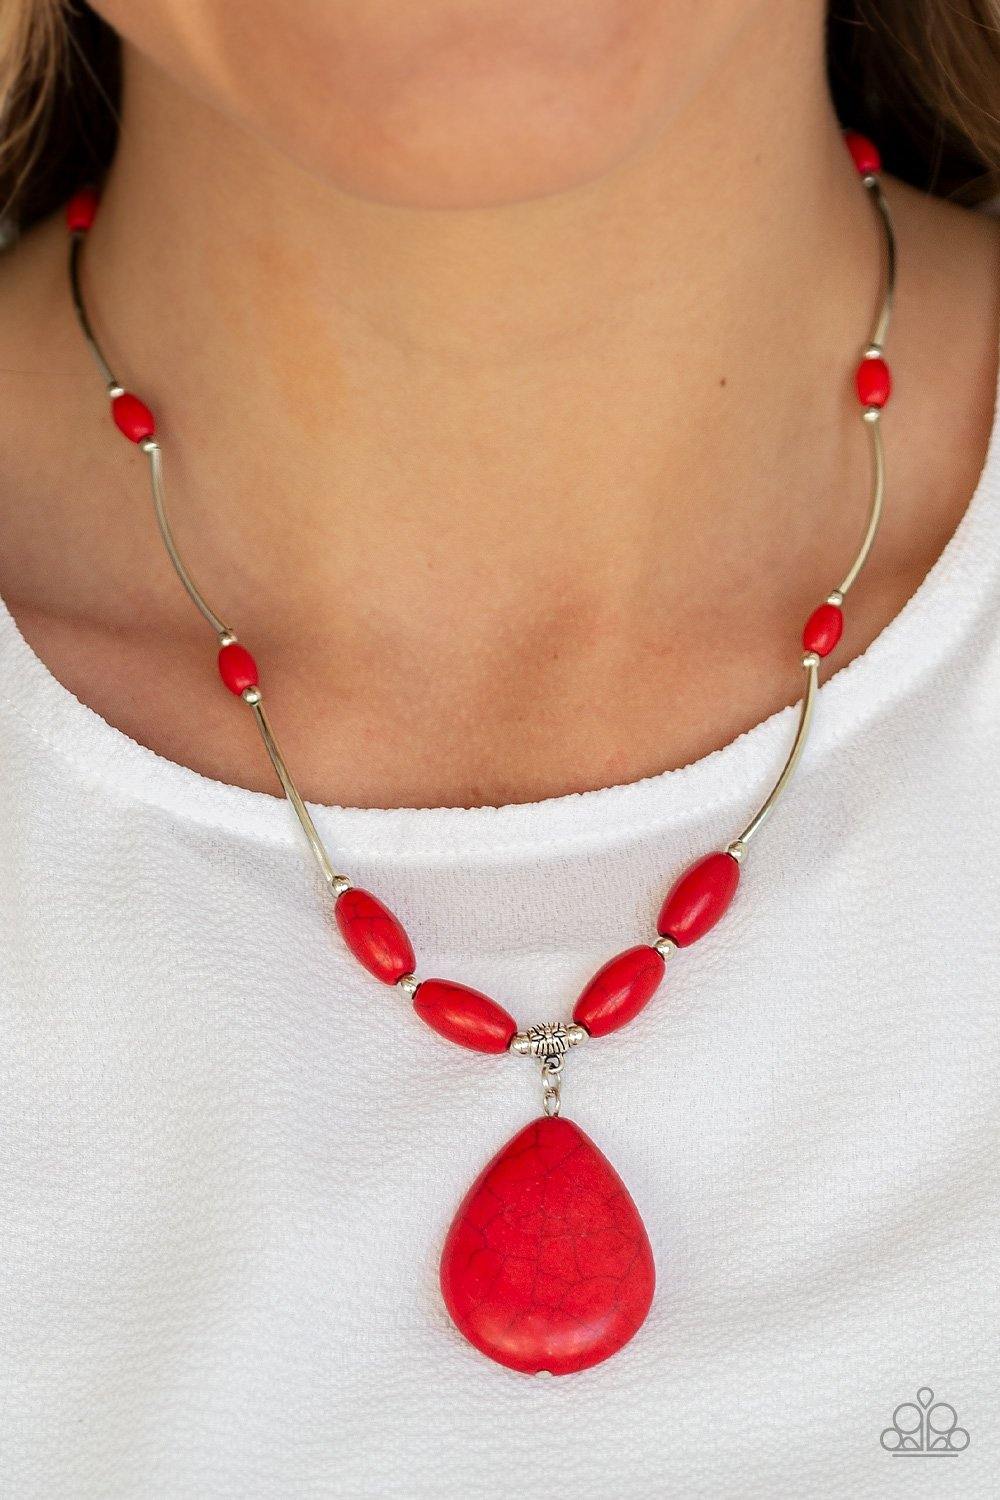 Explore the Elements - Red Necklace - Paparazzi Accessories - Sassysblingandthings